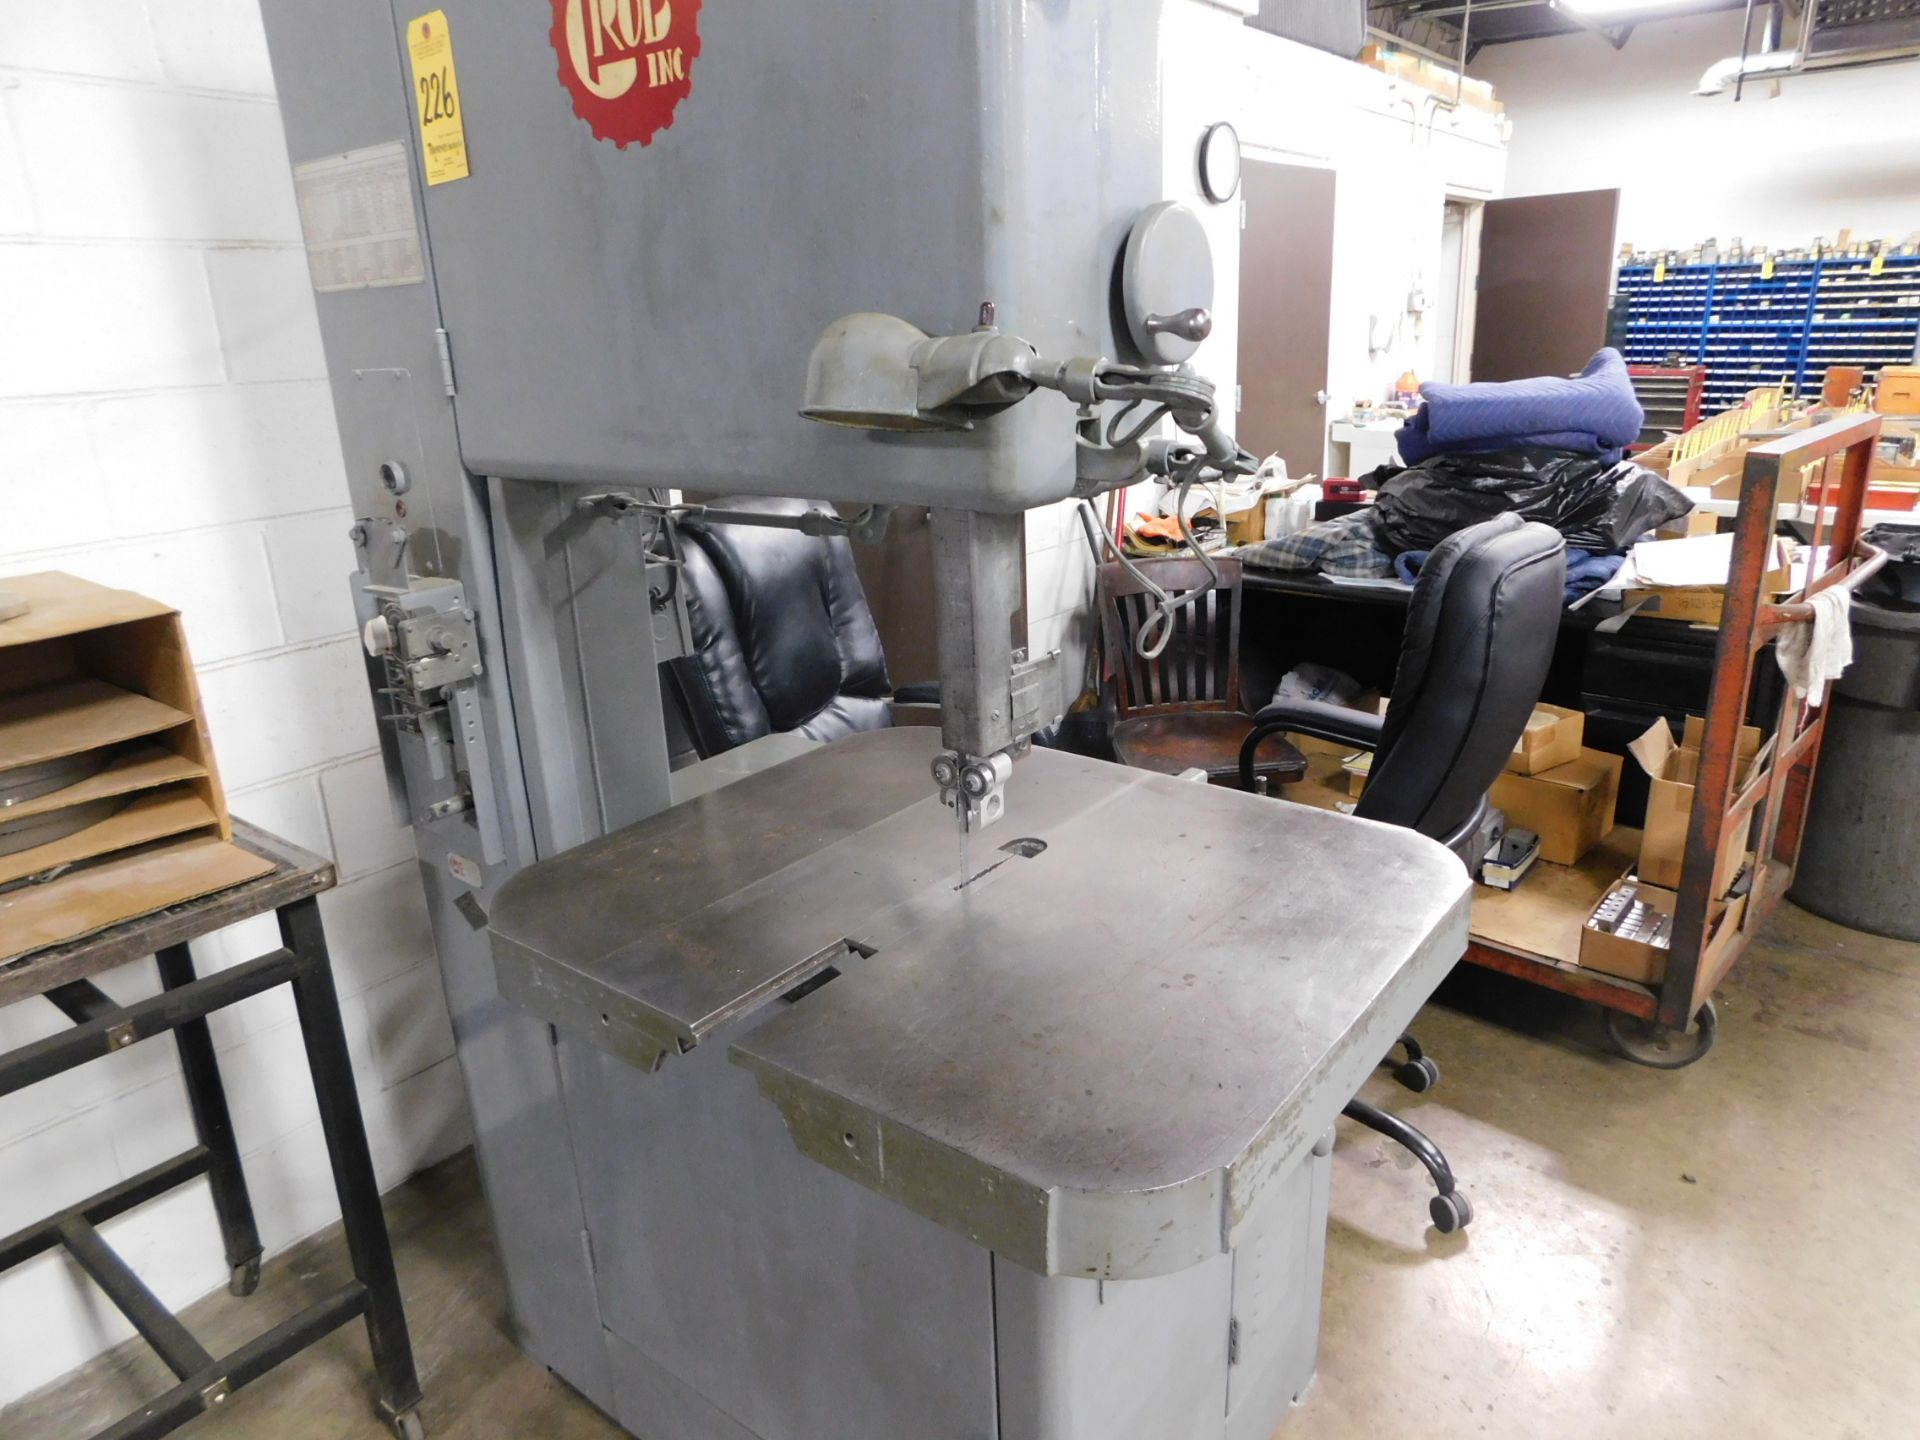 Grob Model NS-24 Vertical Band Saw, 24", s/n 3198, with Blade Welder - Image 2 of 6